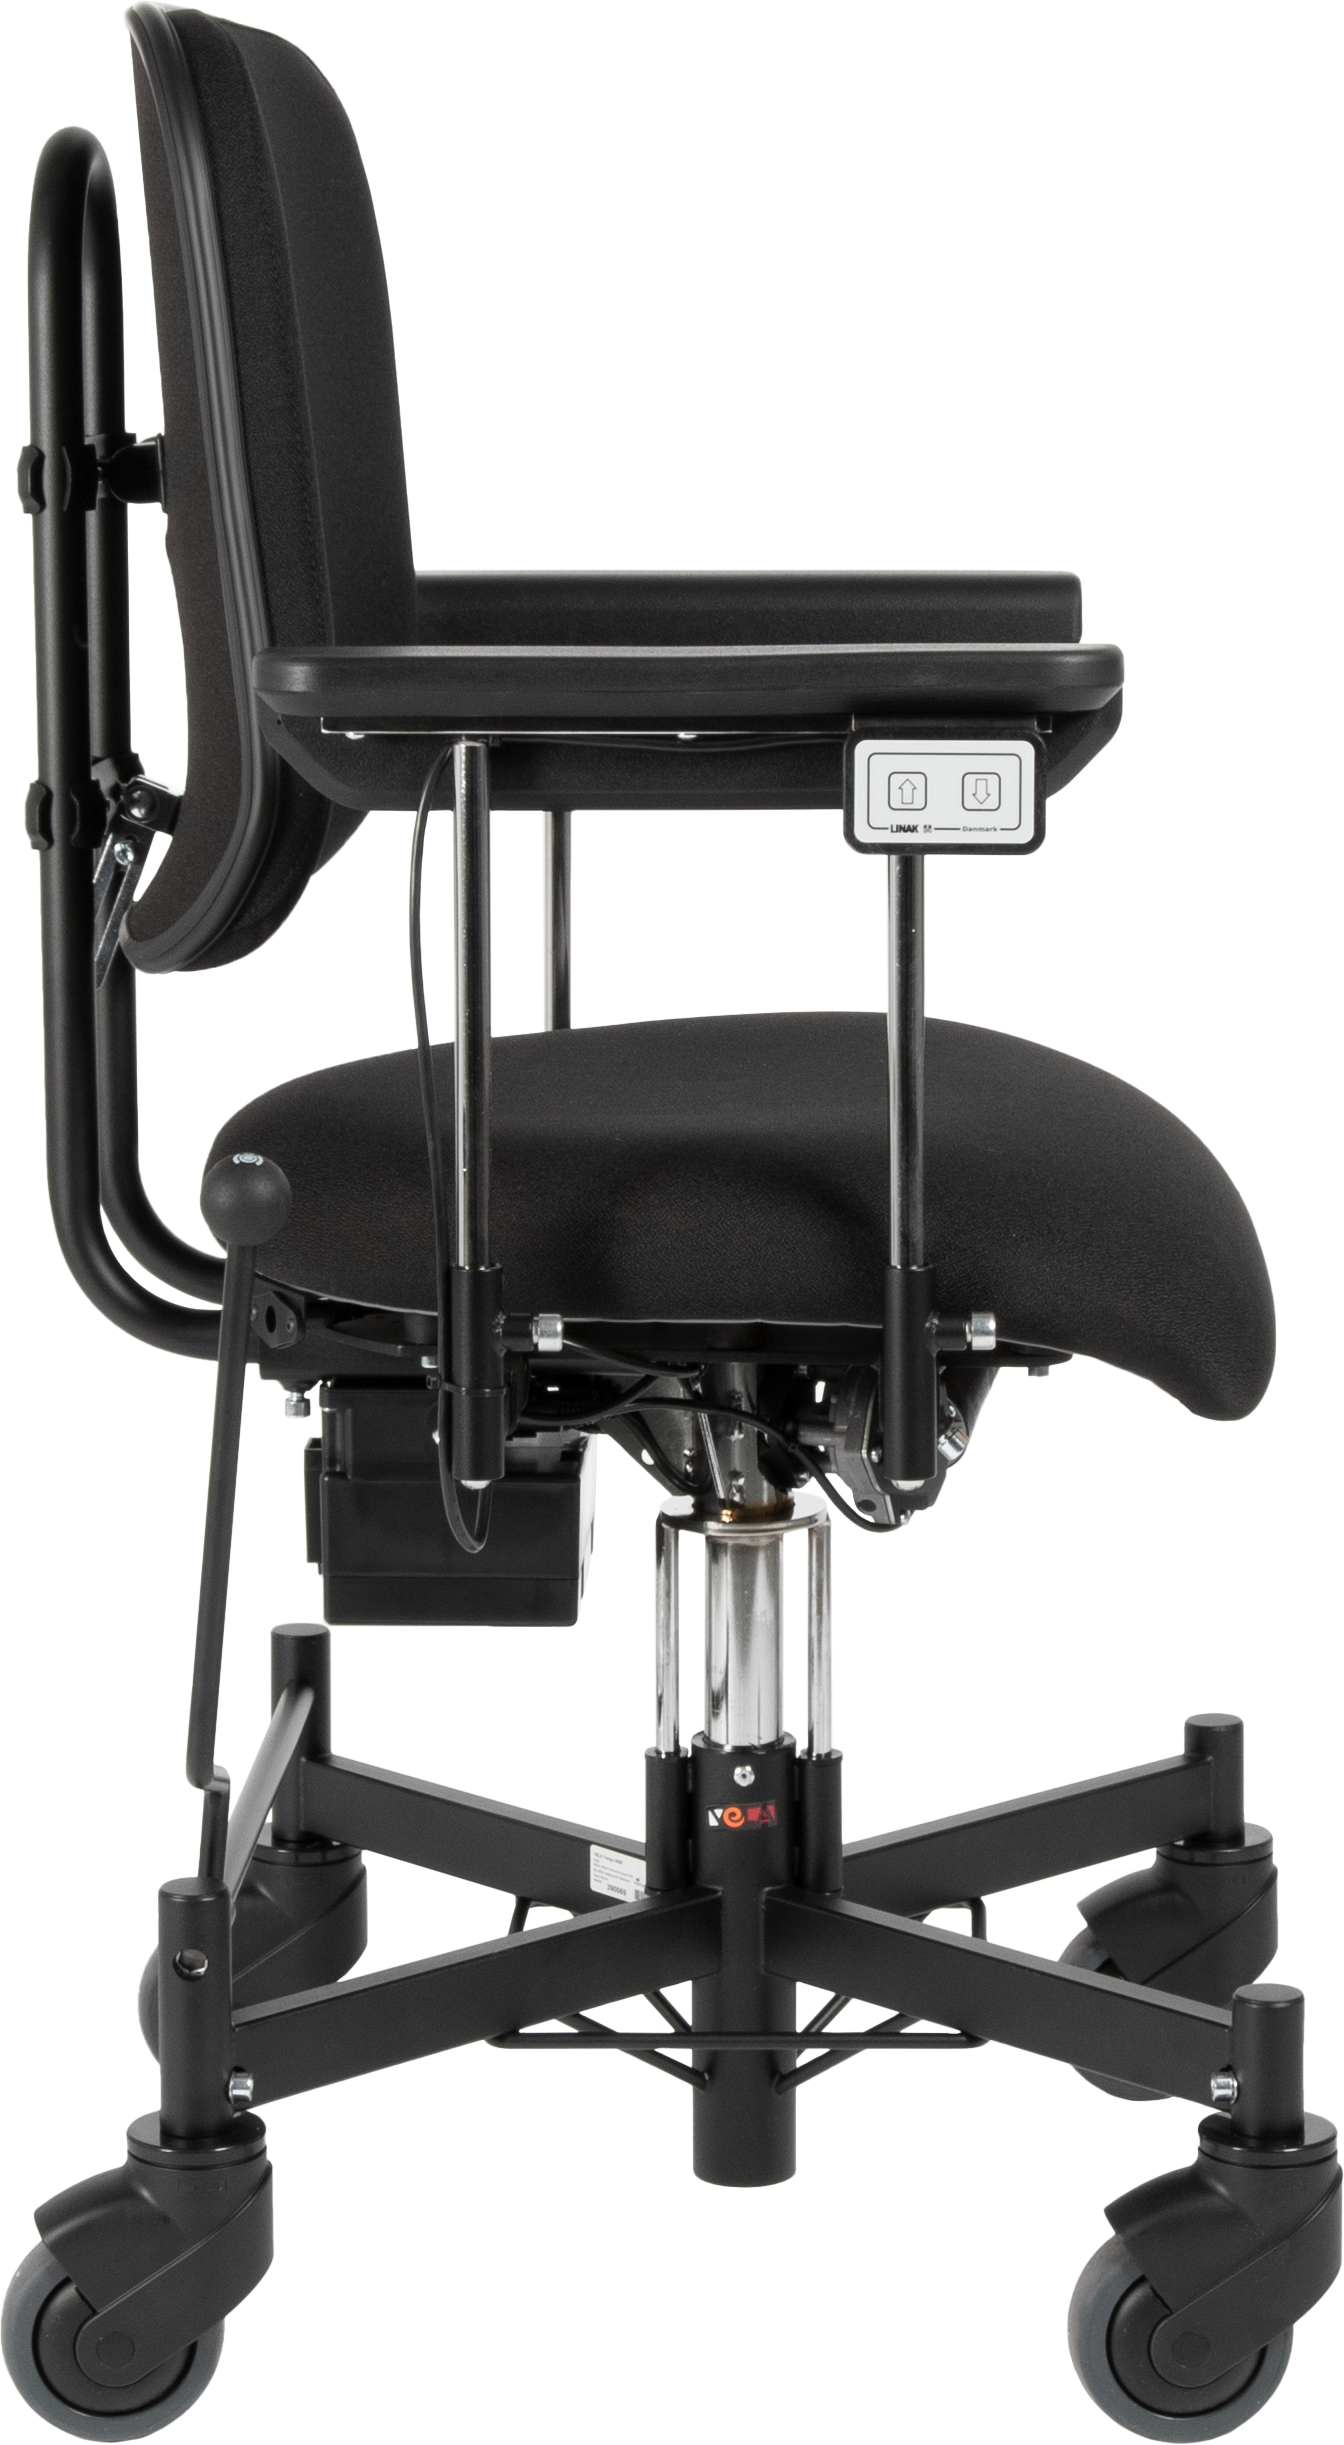 Vela 300 bariatric chair side view in black.